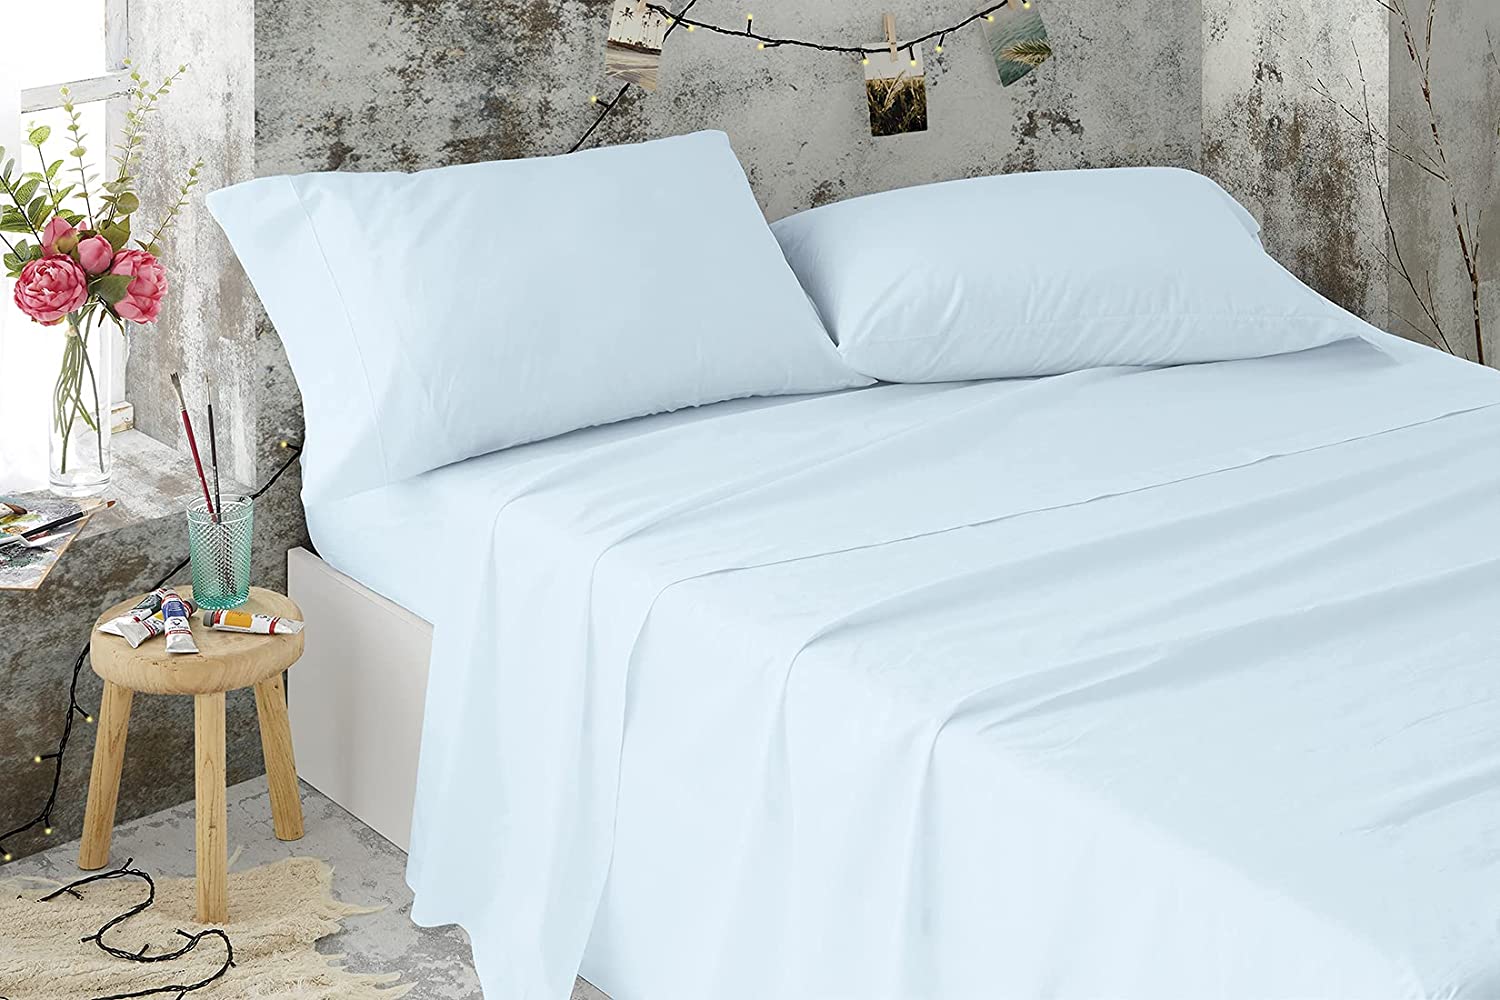 Burrito Blanco Hospitality Sheets |  Sheet 80 |  Single Bed |  Cotton / Polyester Bedding |  Easy Ironing |  Color Blue |  Available in More Sizes